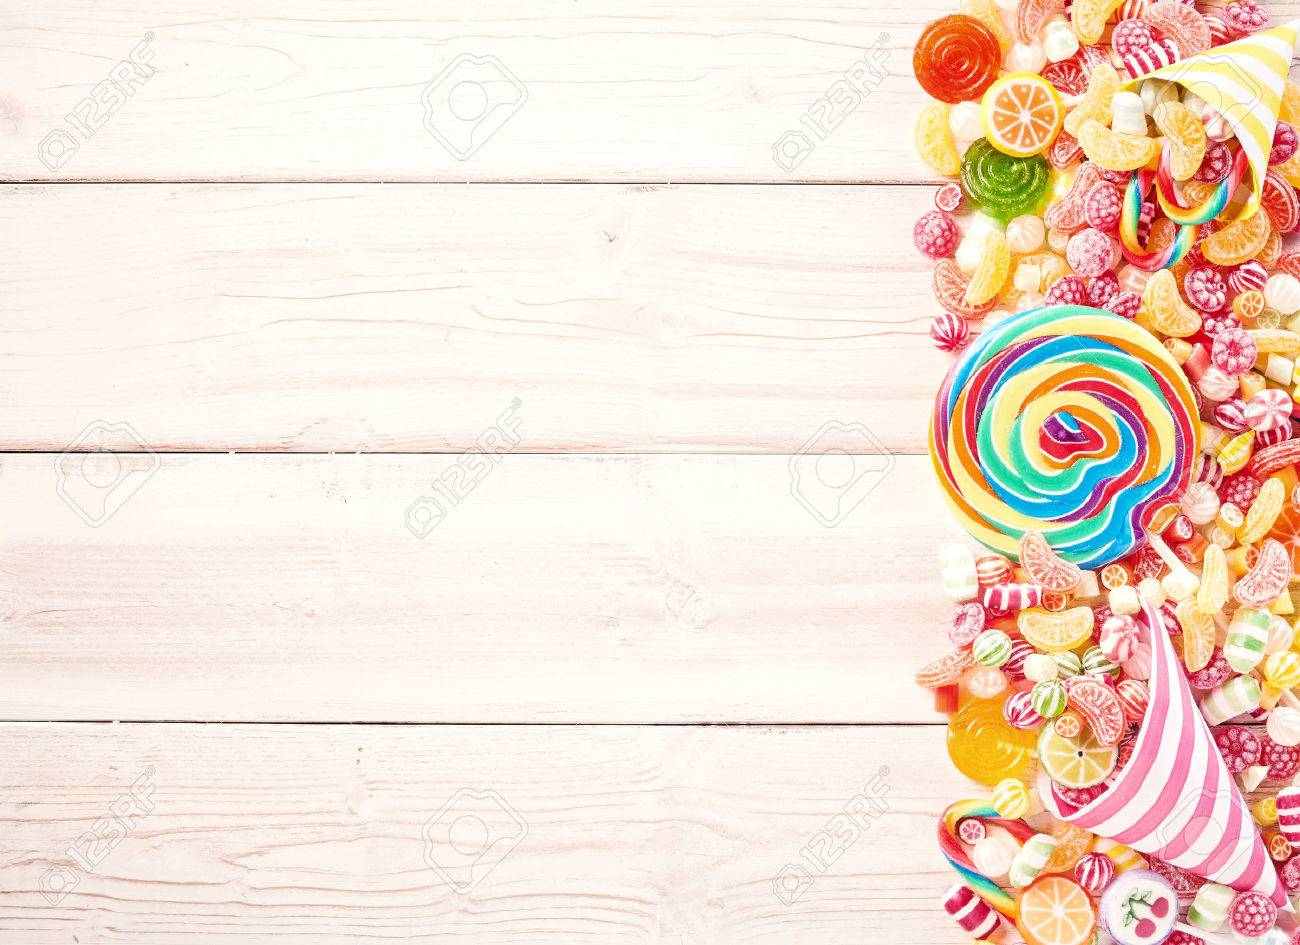 Background Of Wood Slat Table Piled With Sweets To One Side With